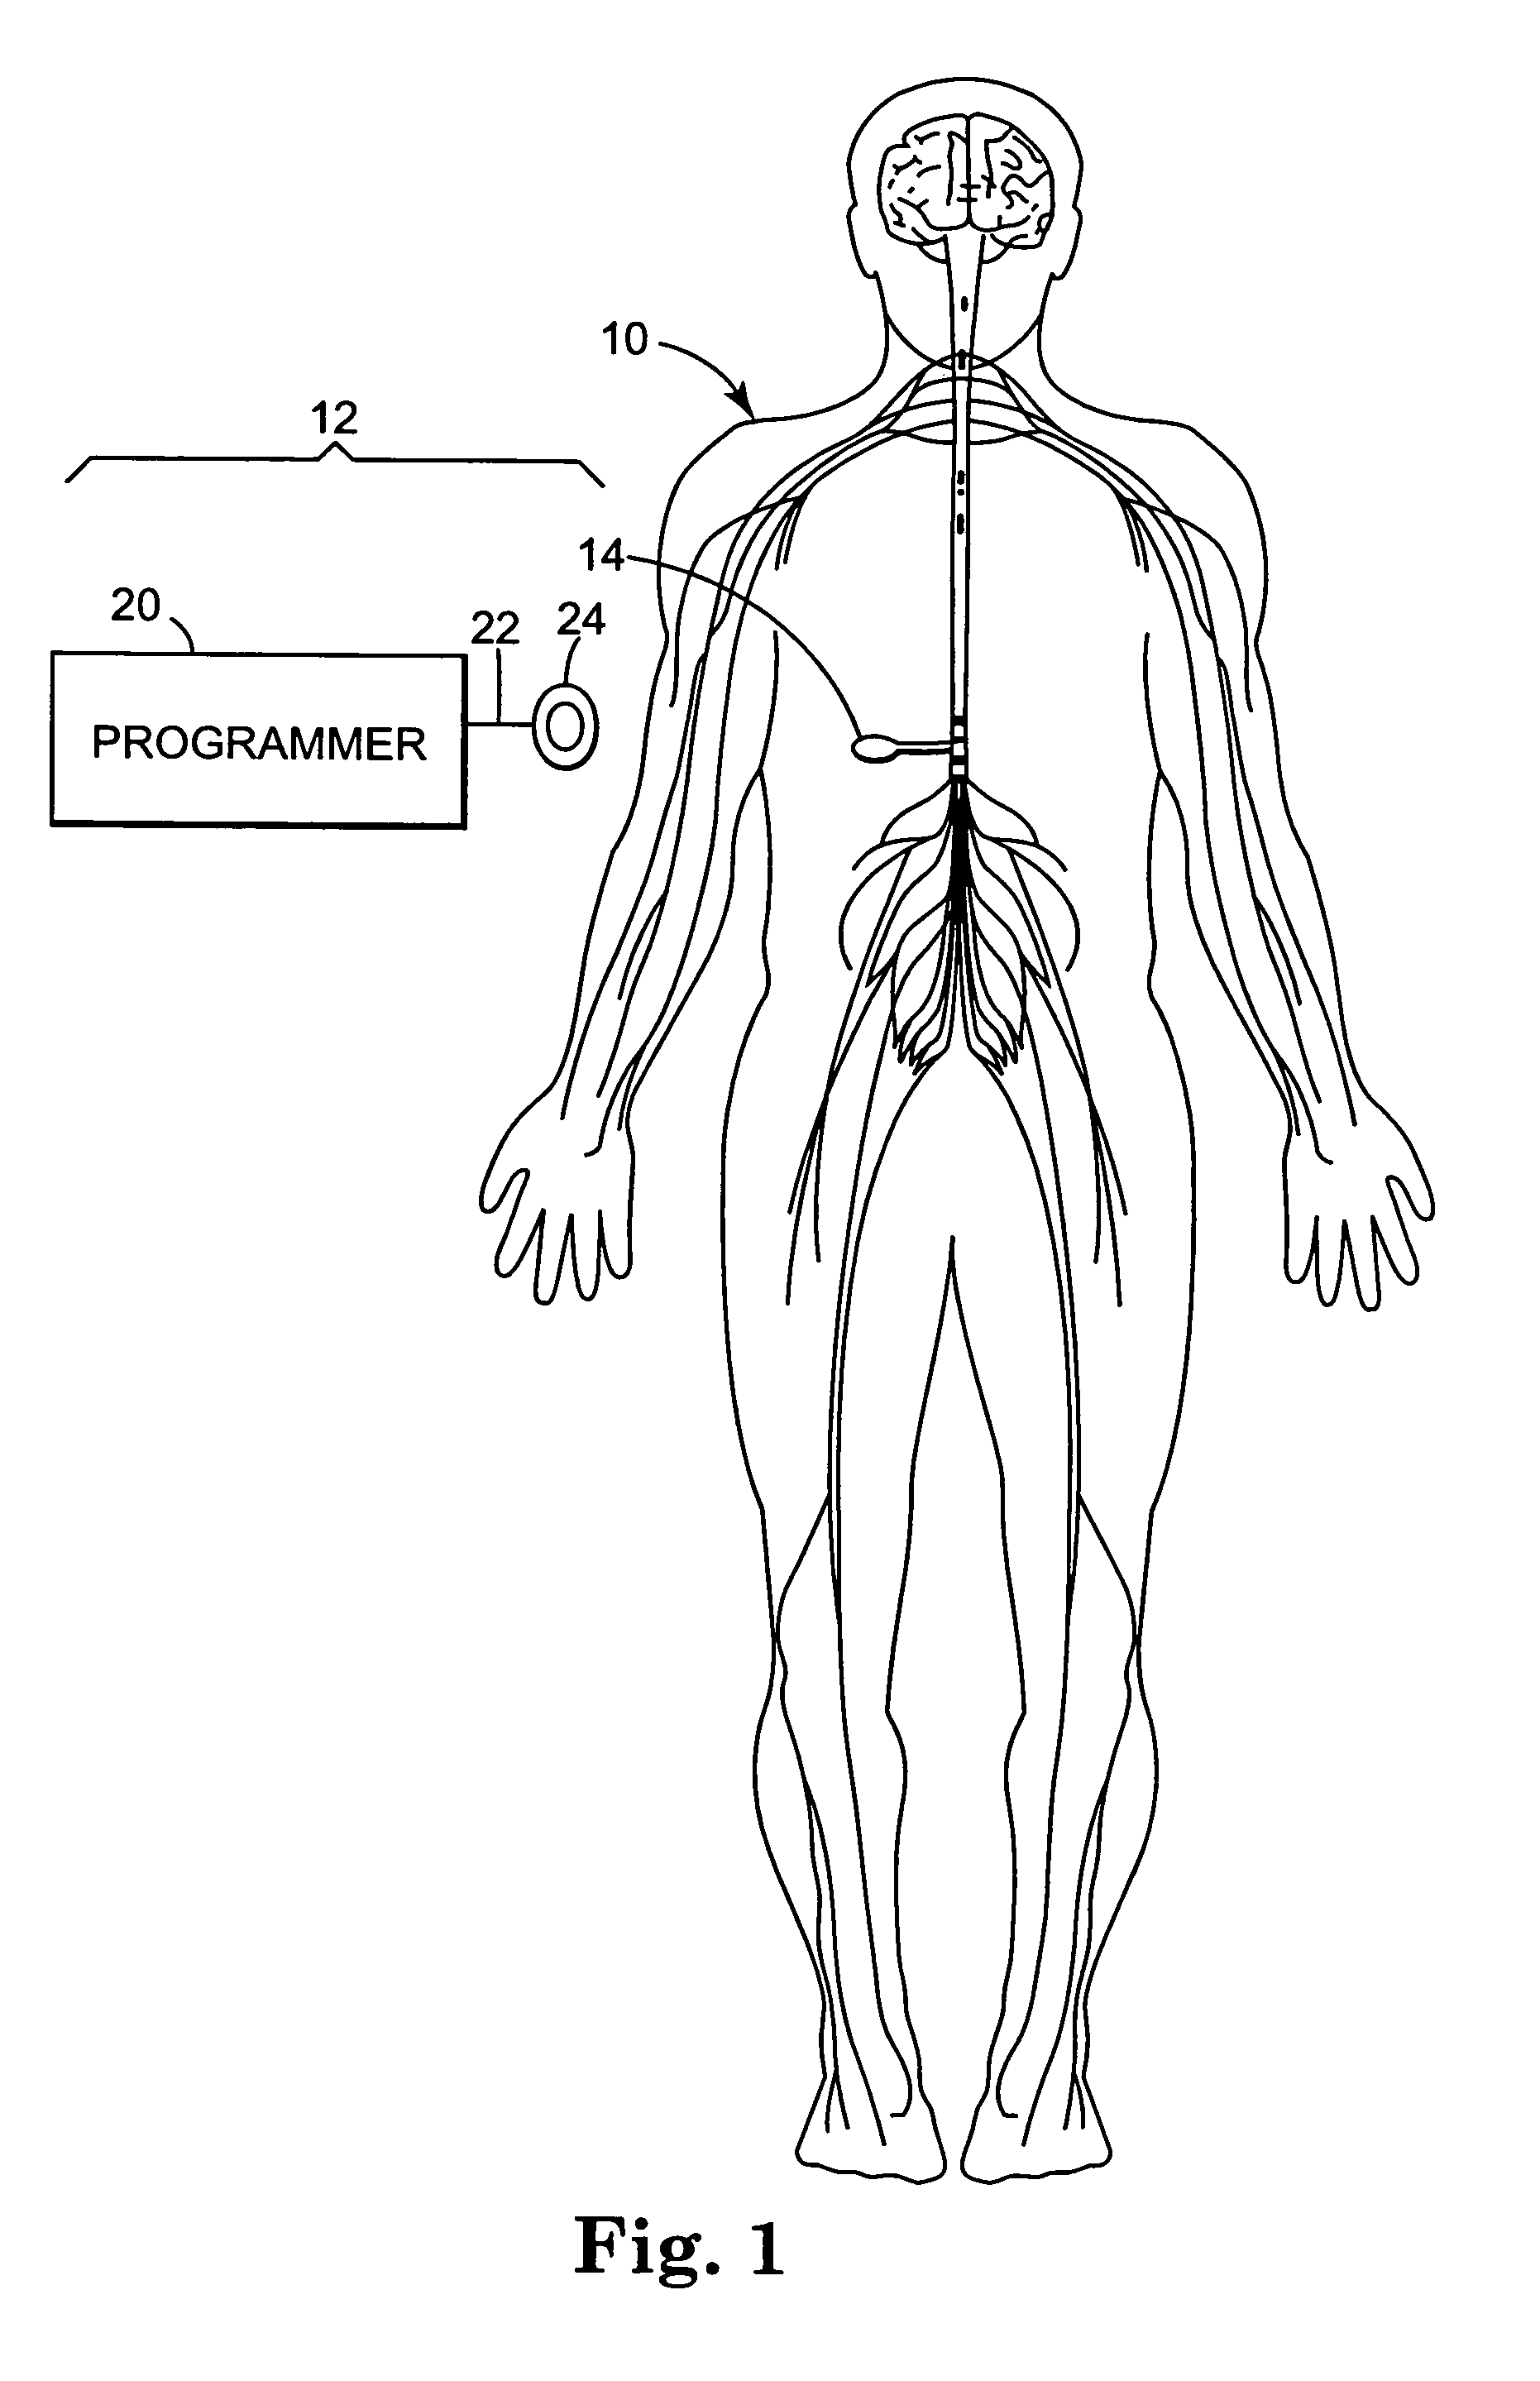 Method of delivering a fluid medication to a patient in flex mode